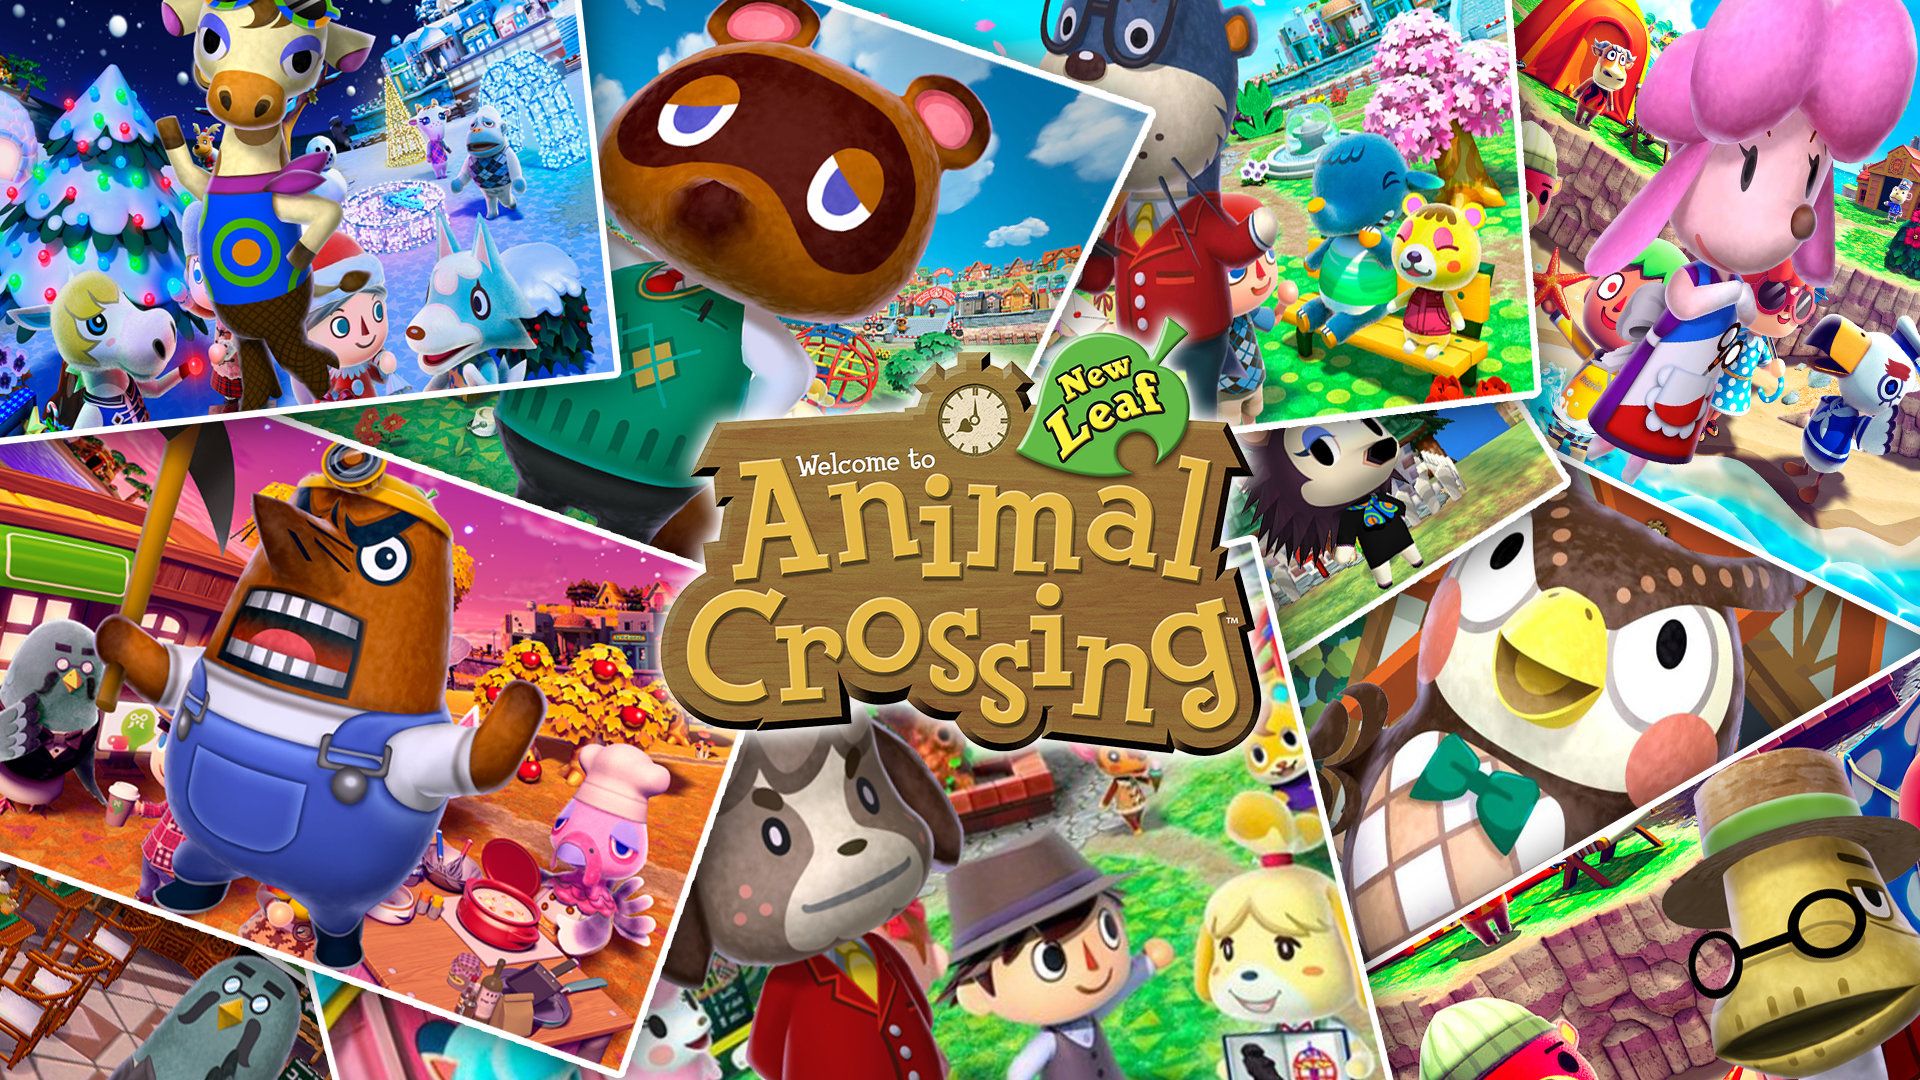 Animal Crossing: New Leaf is a city-building simulation game - Animal Crossing